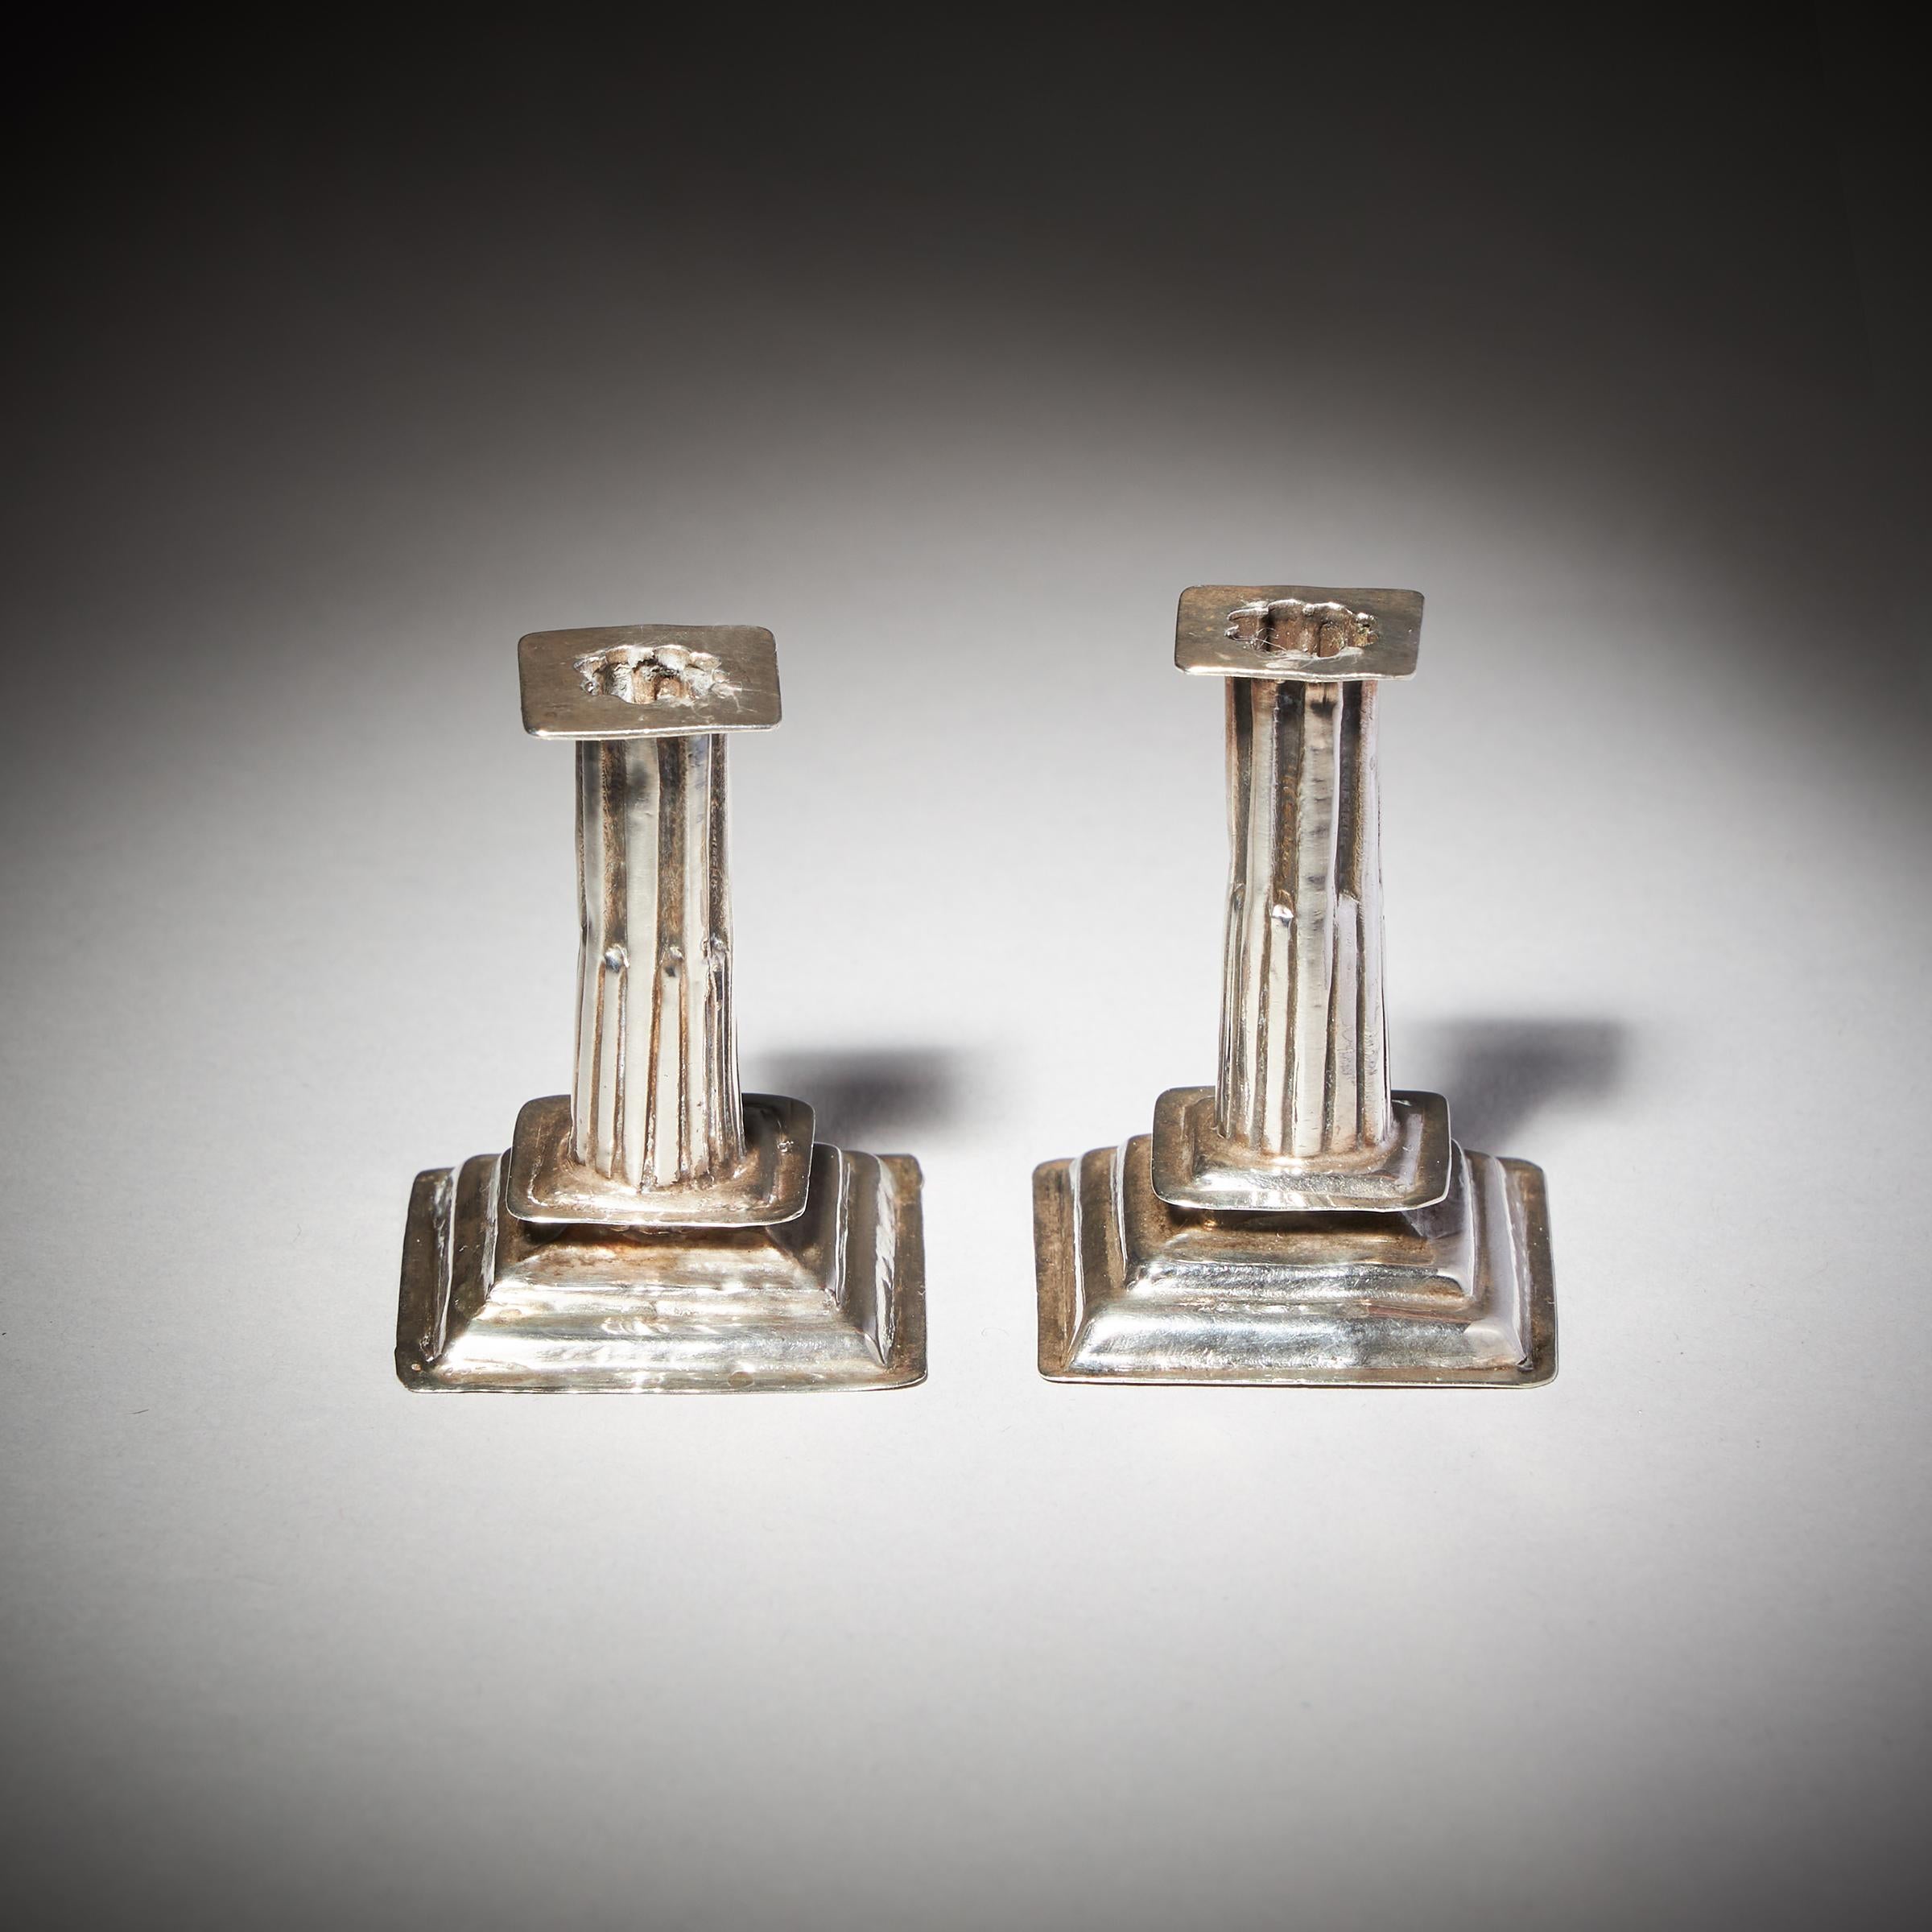 A Pair of 17th Century William and Mary Miniature Candlesticks By George Manjoy 2